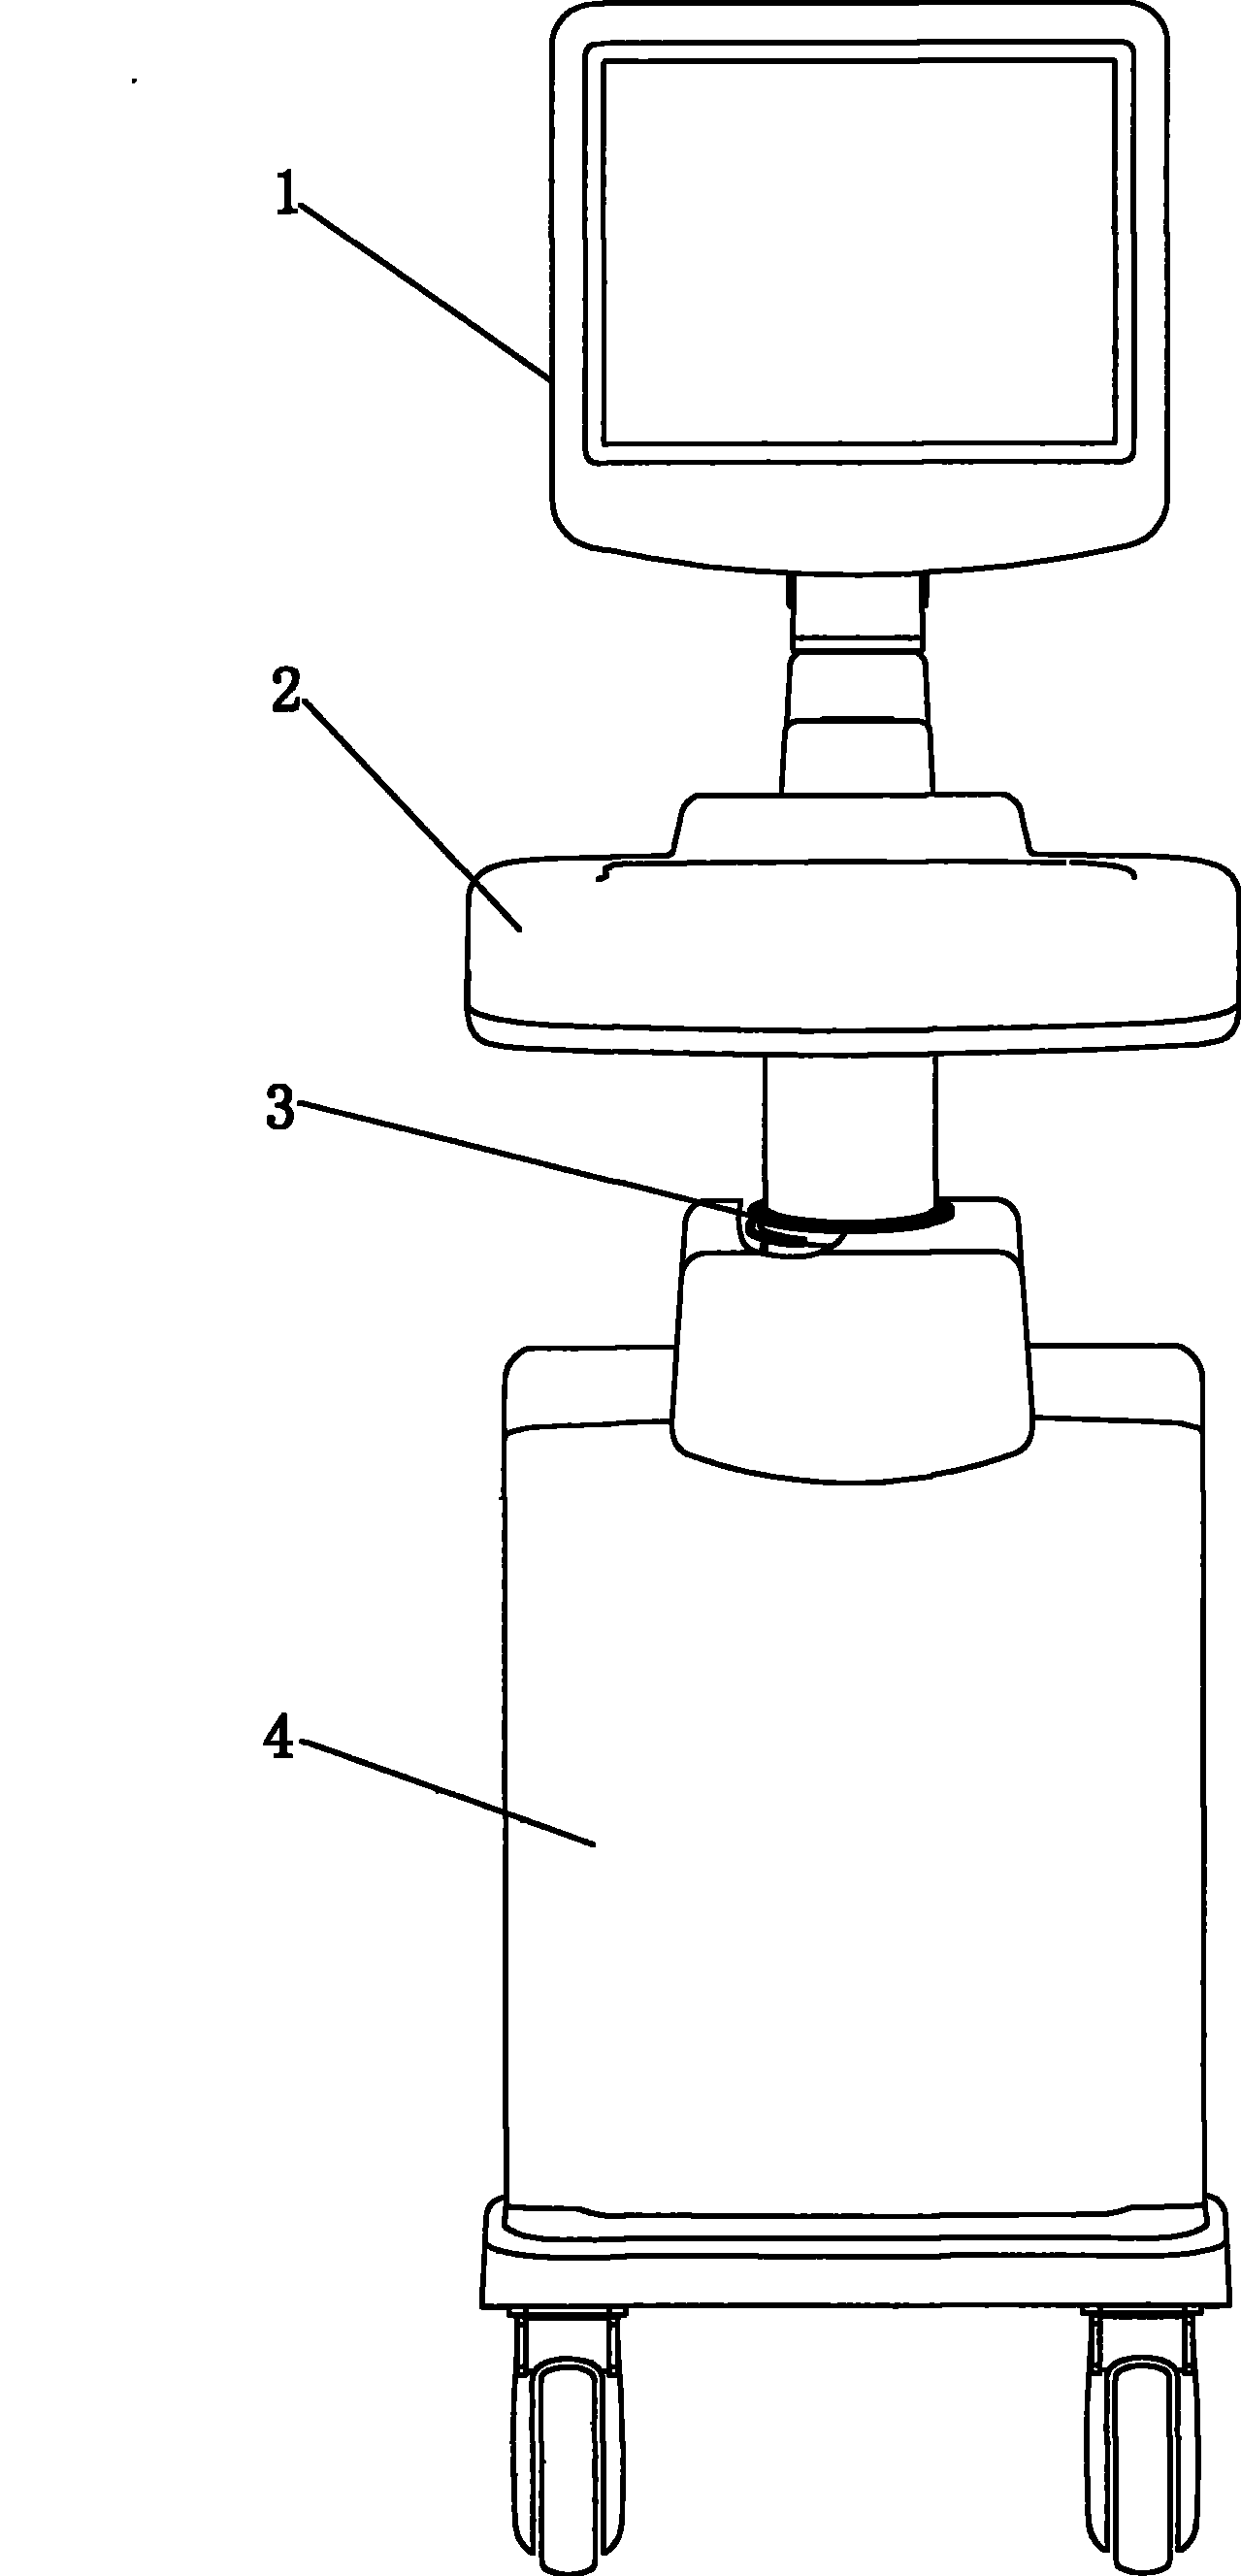 Interval adjusting construction of moving component